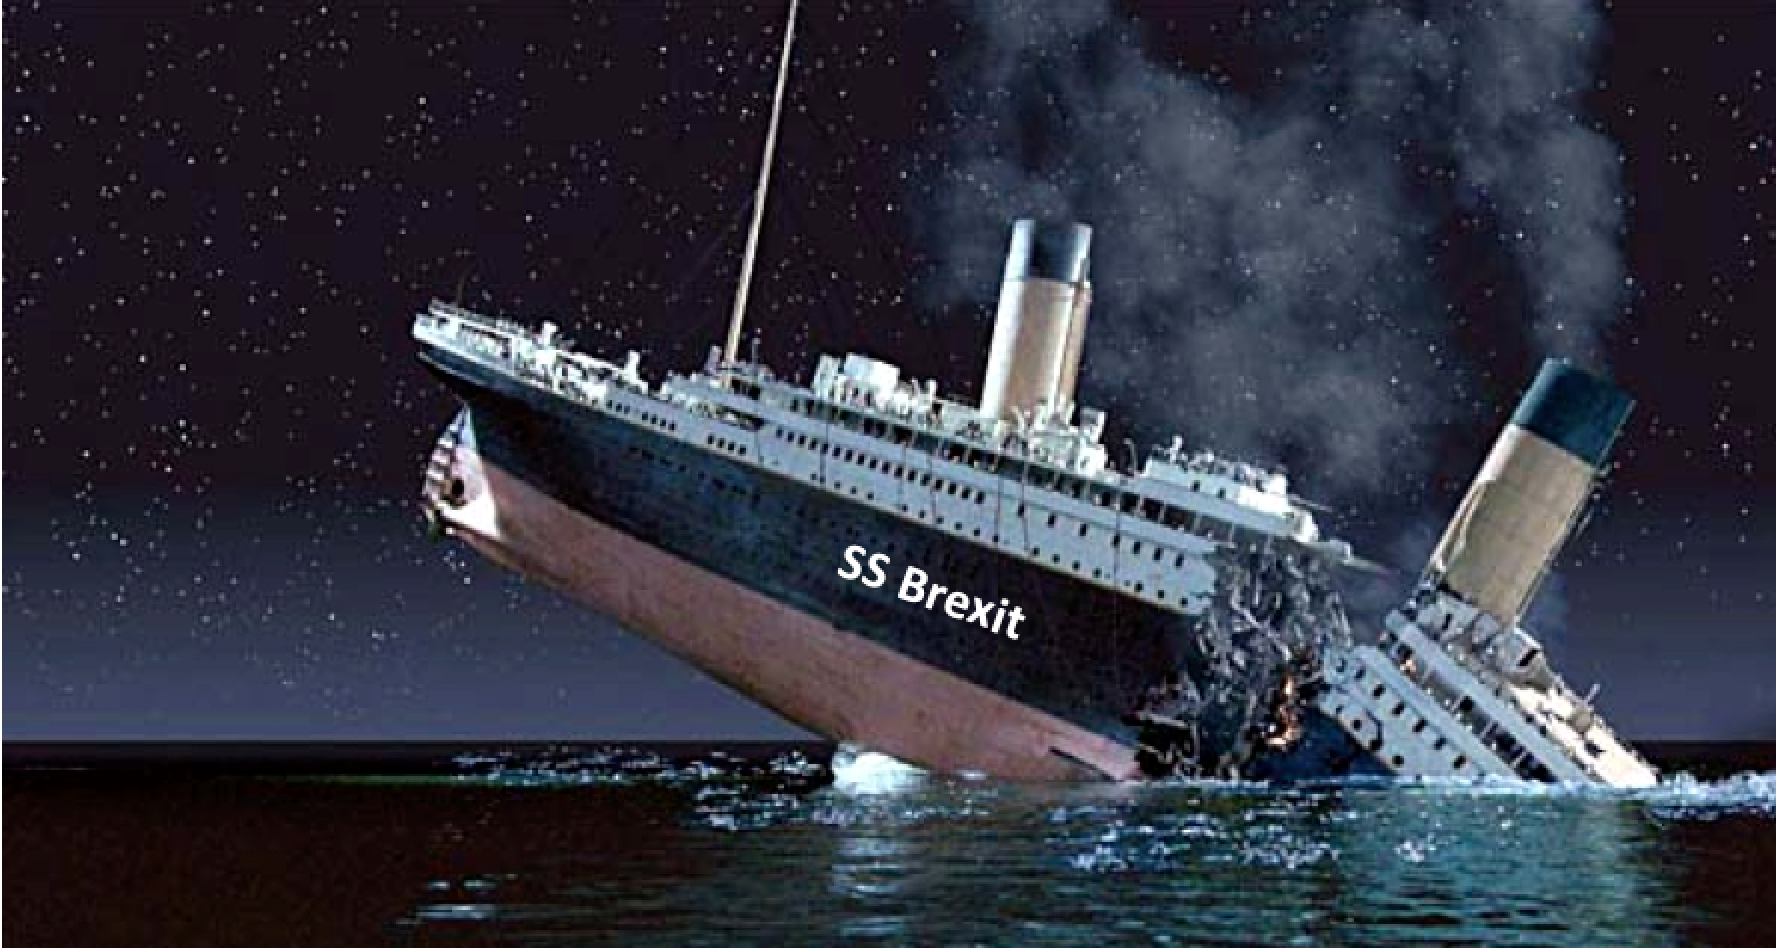 SS Brexit